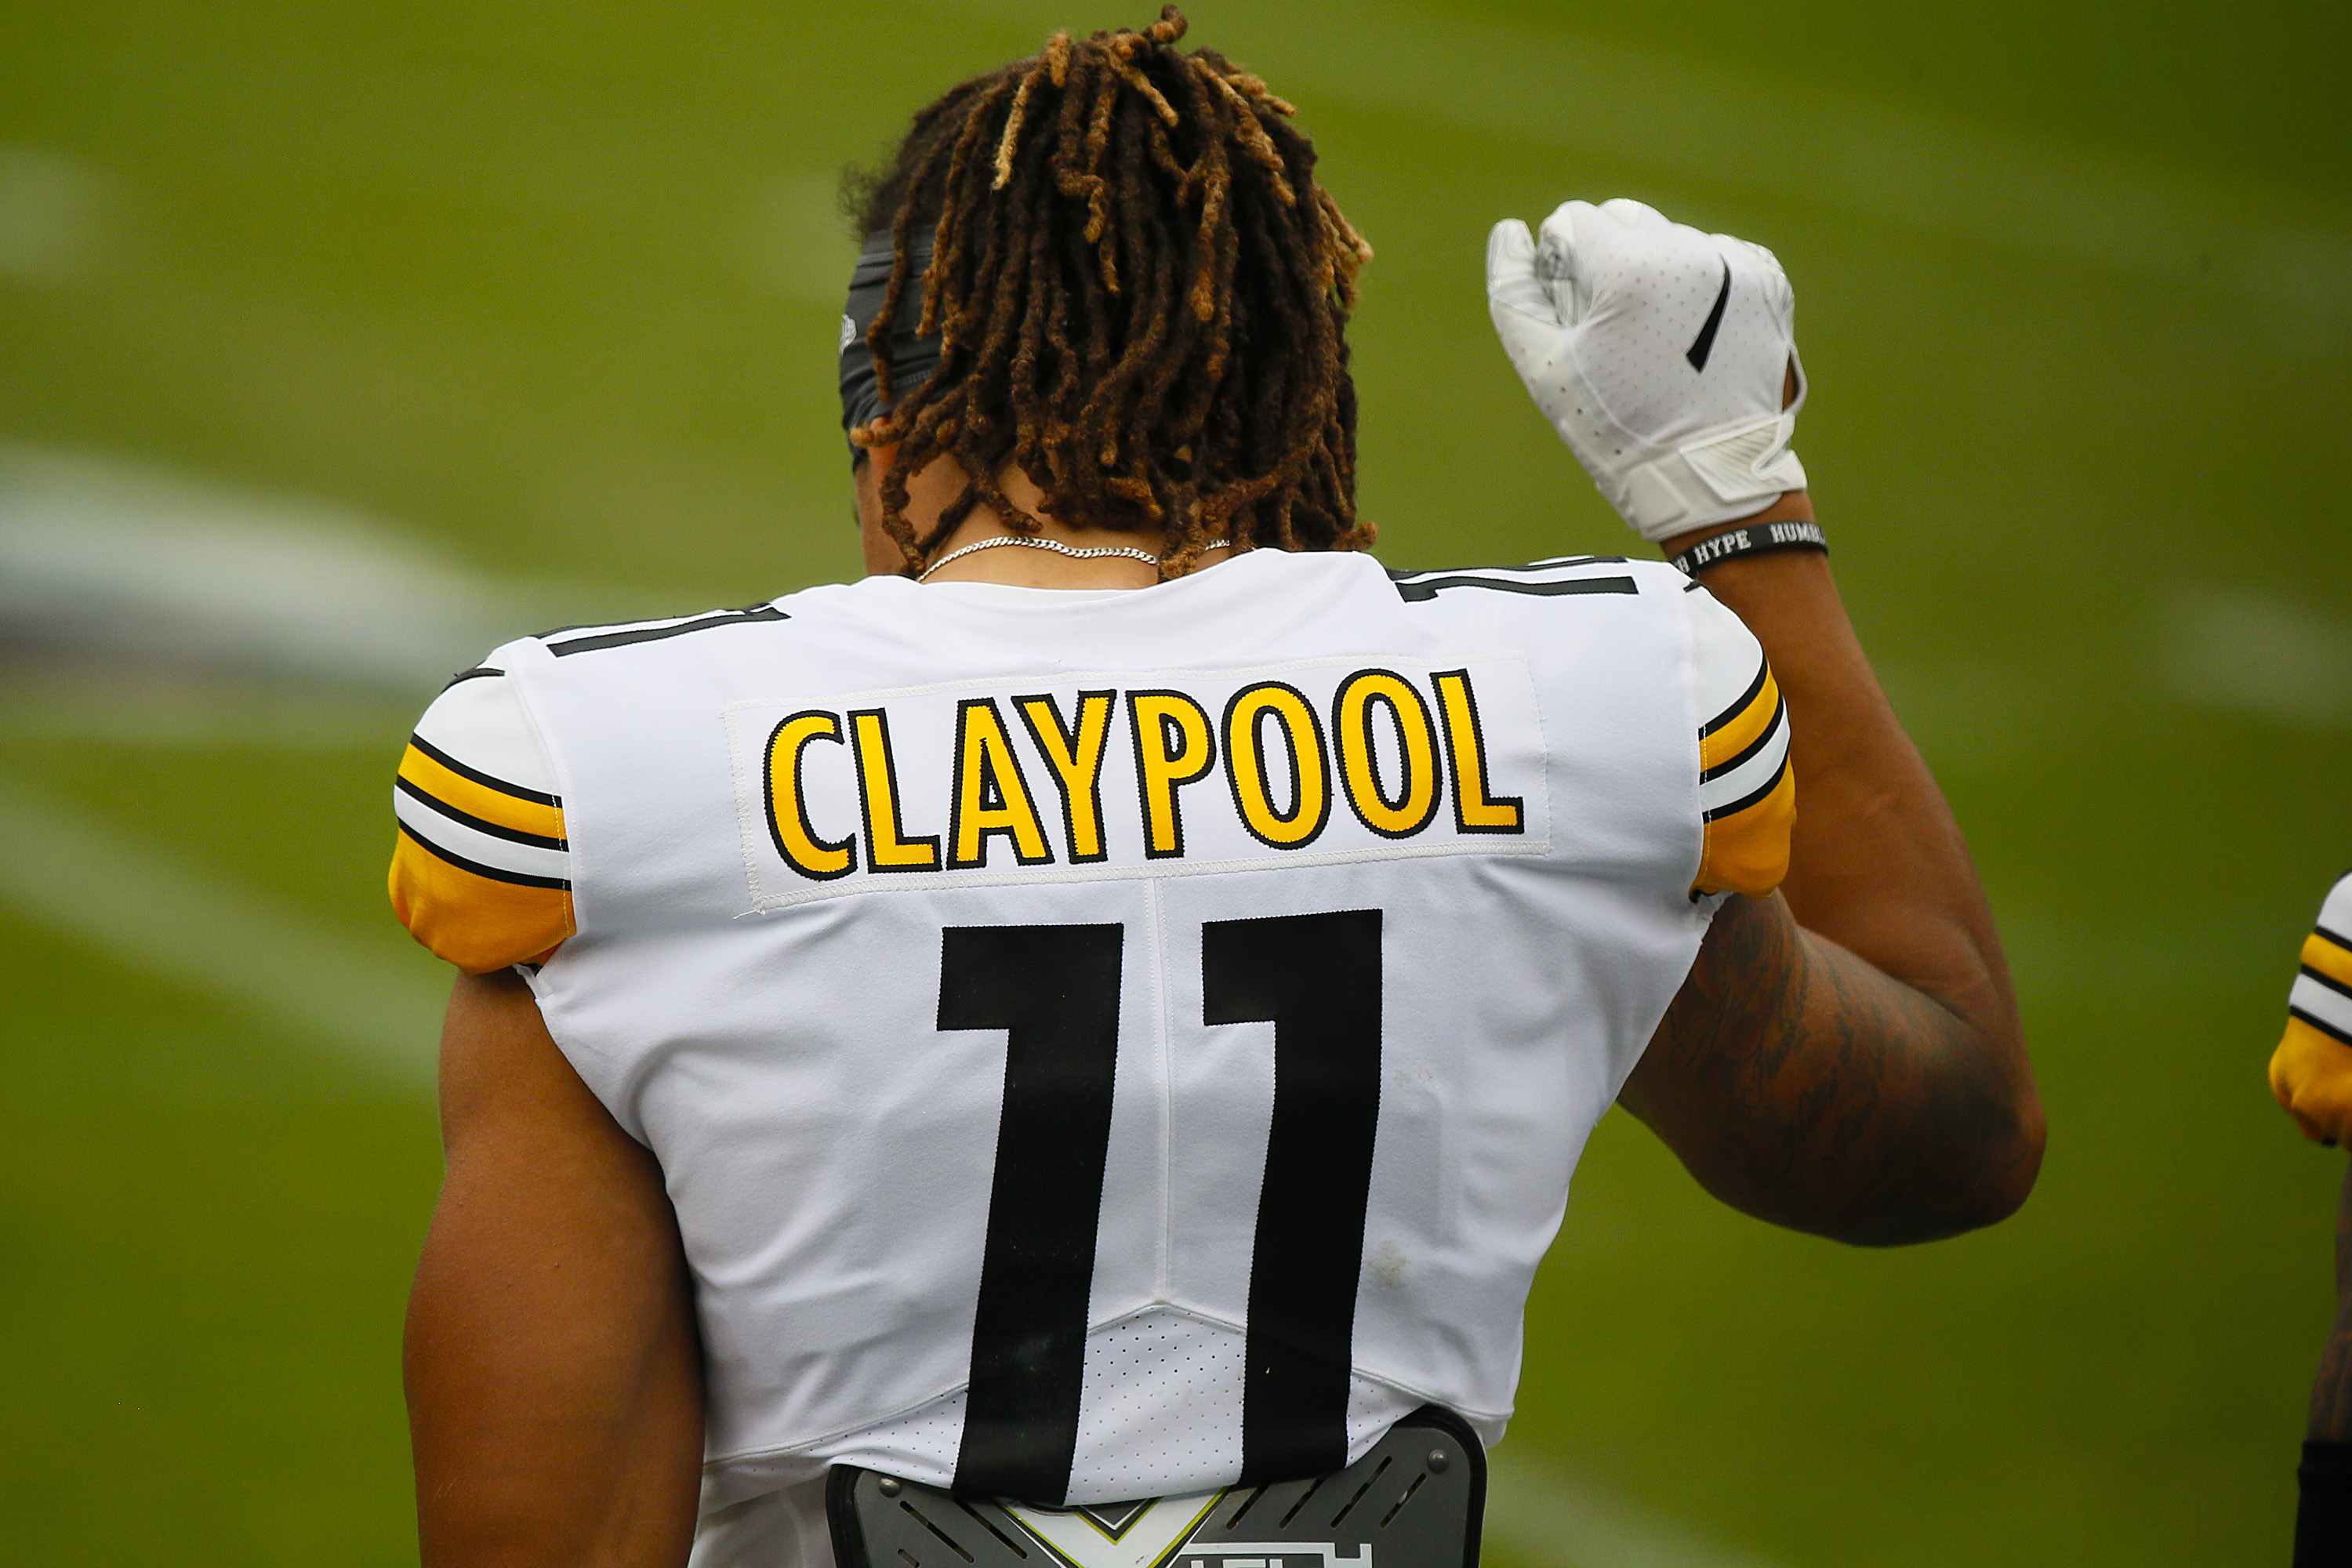 Chase Claypool had a nice off-the-field gesture for a Pittsburgh Steelers fan.